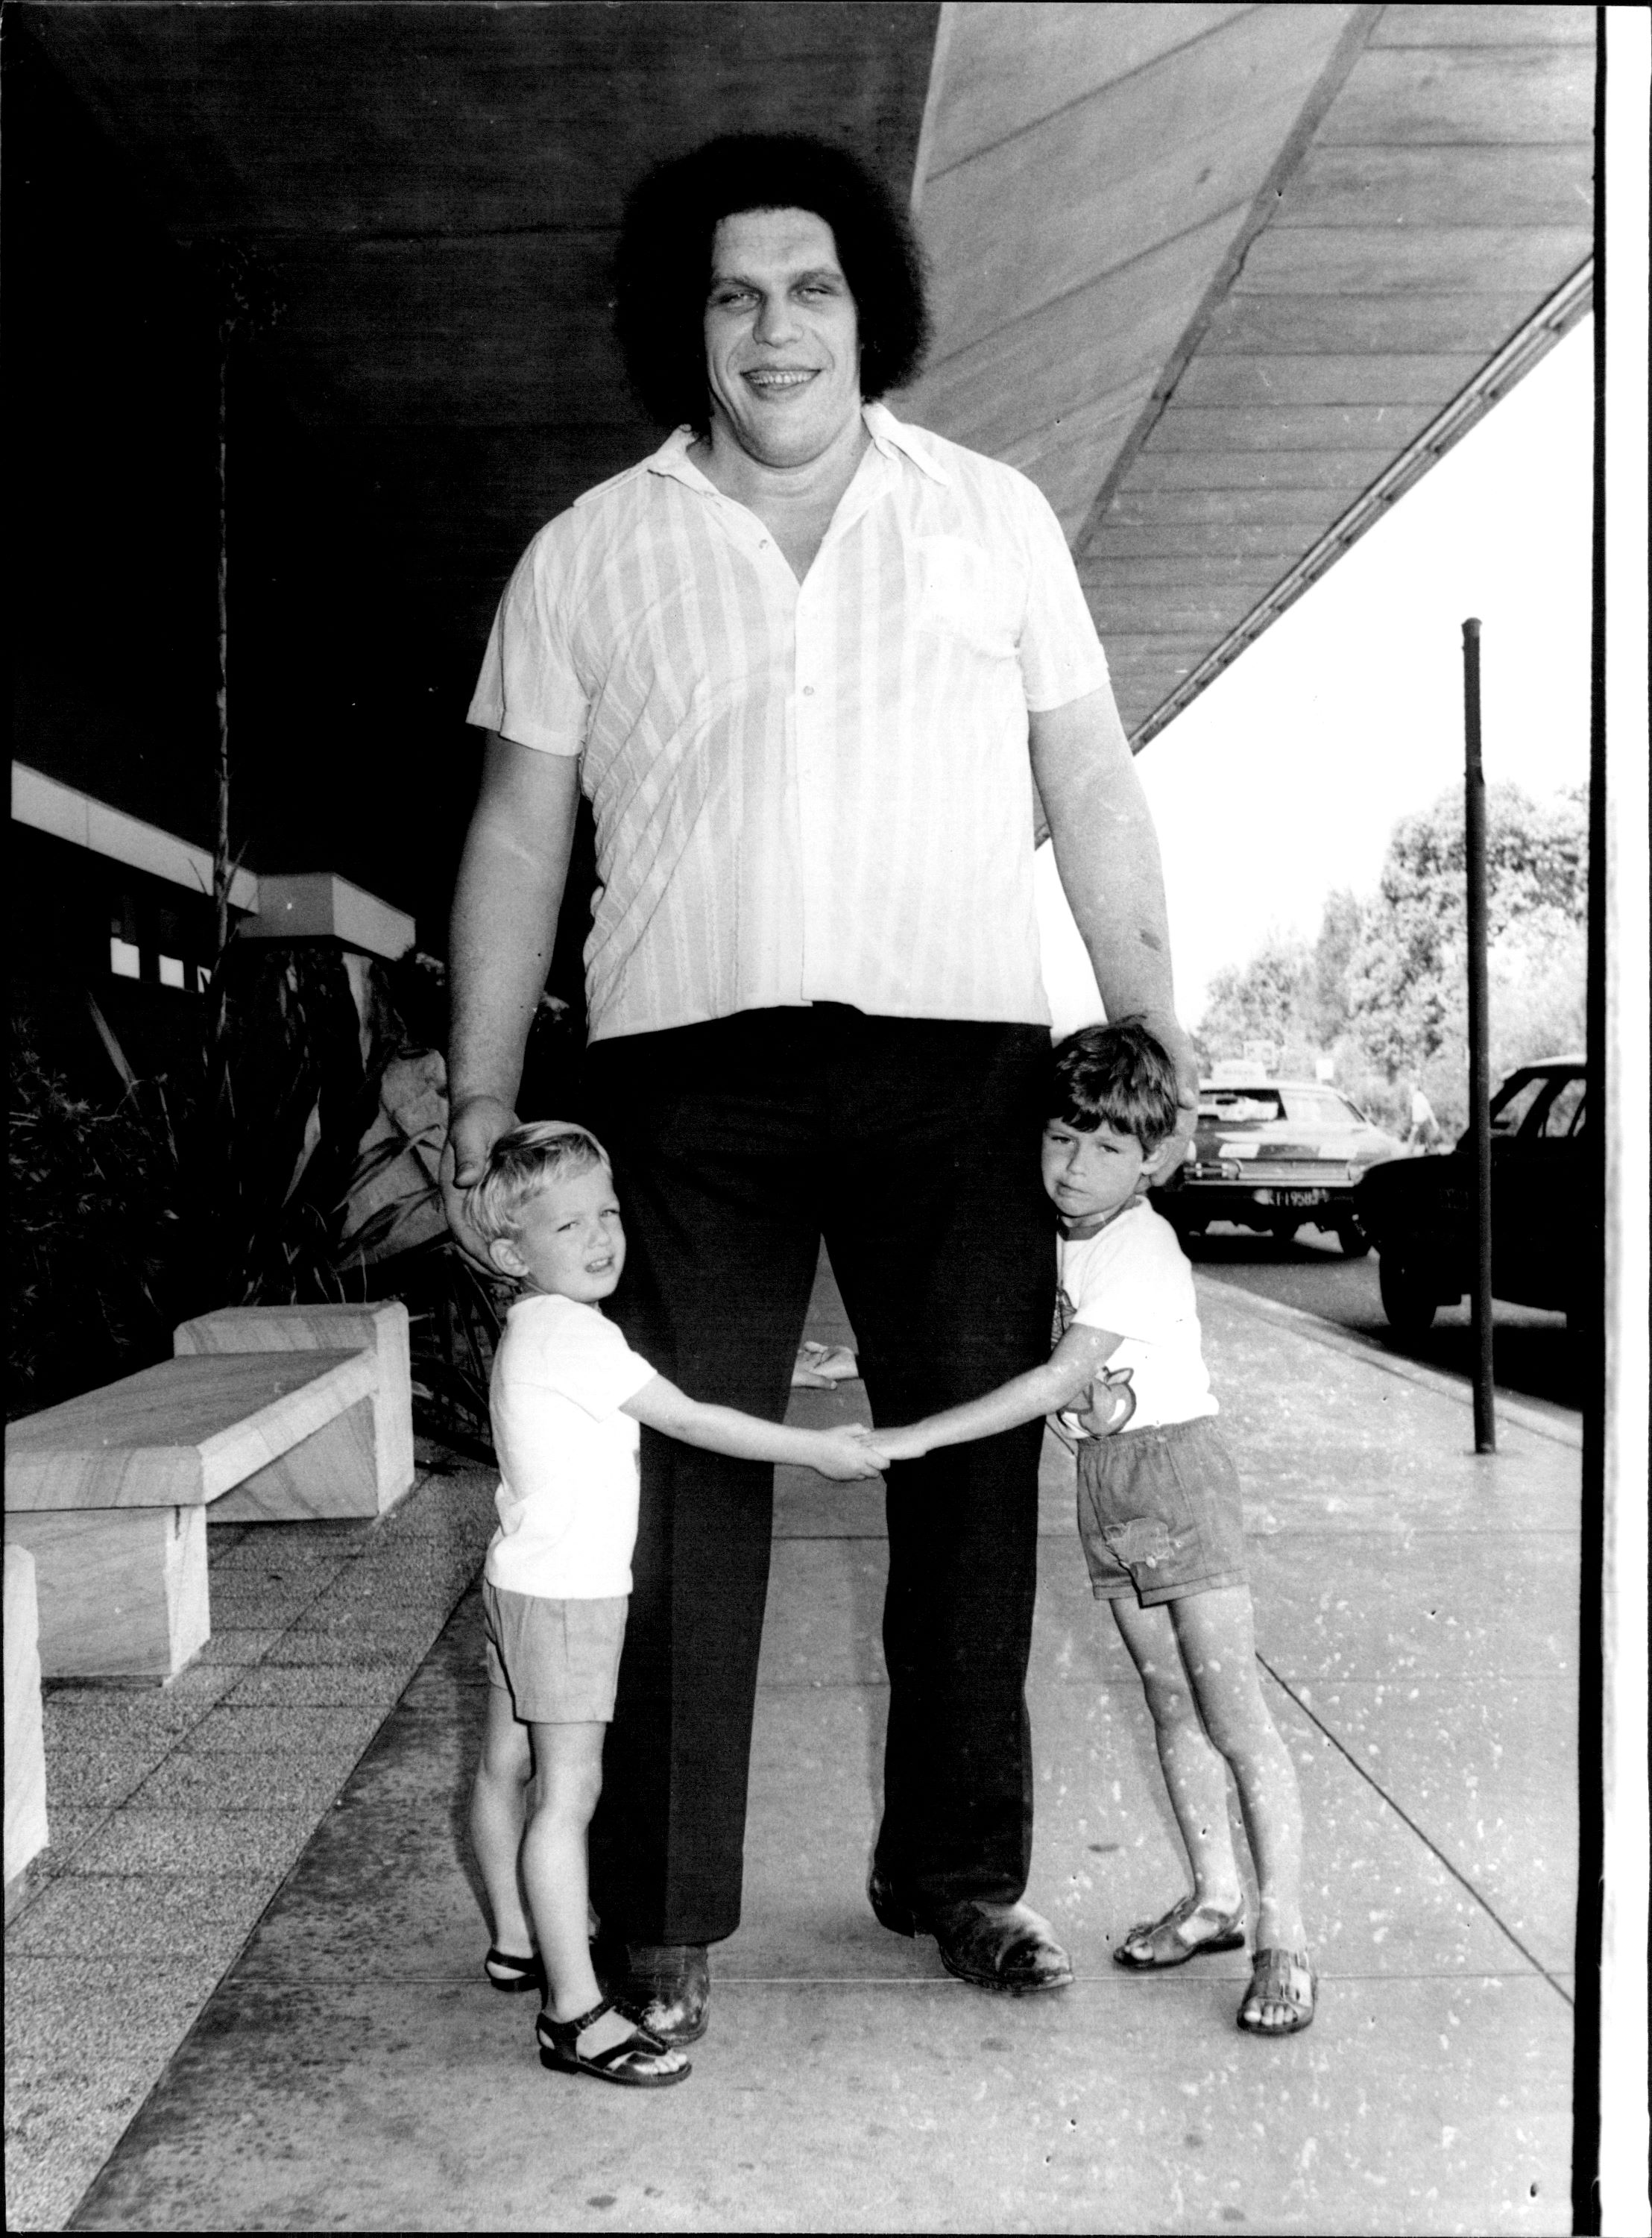 Andre the Giant. I Image: Getty Images.